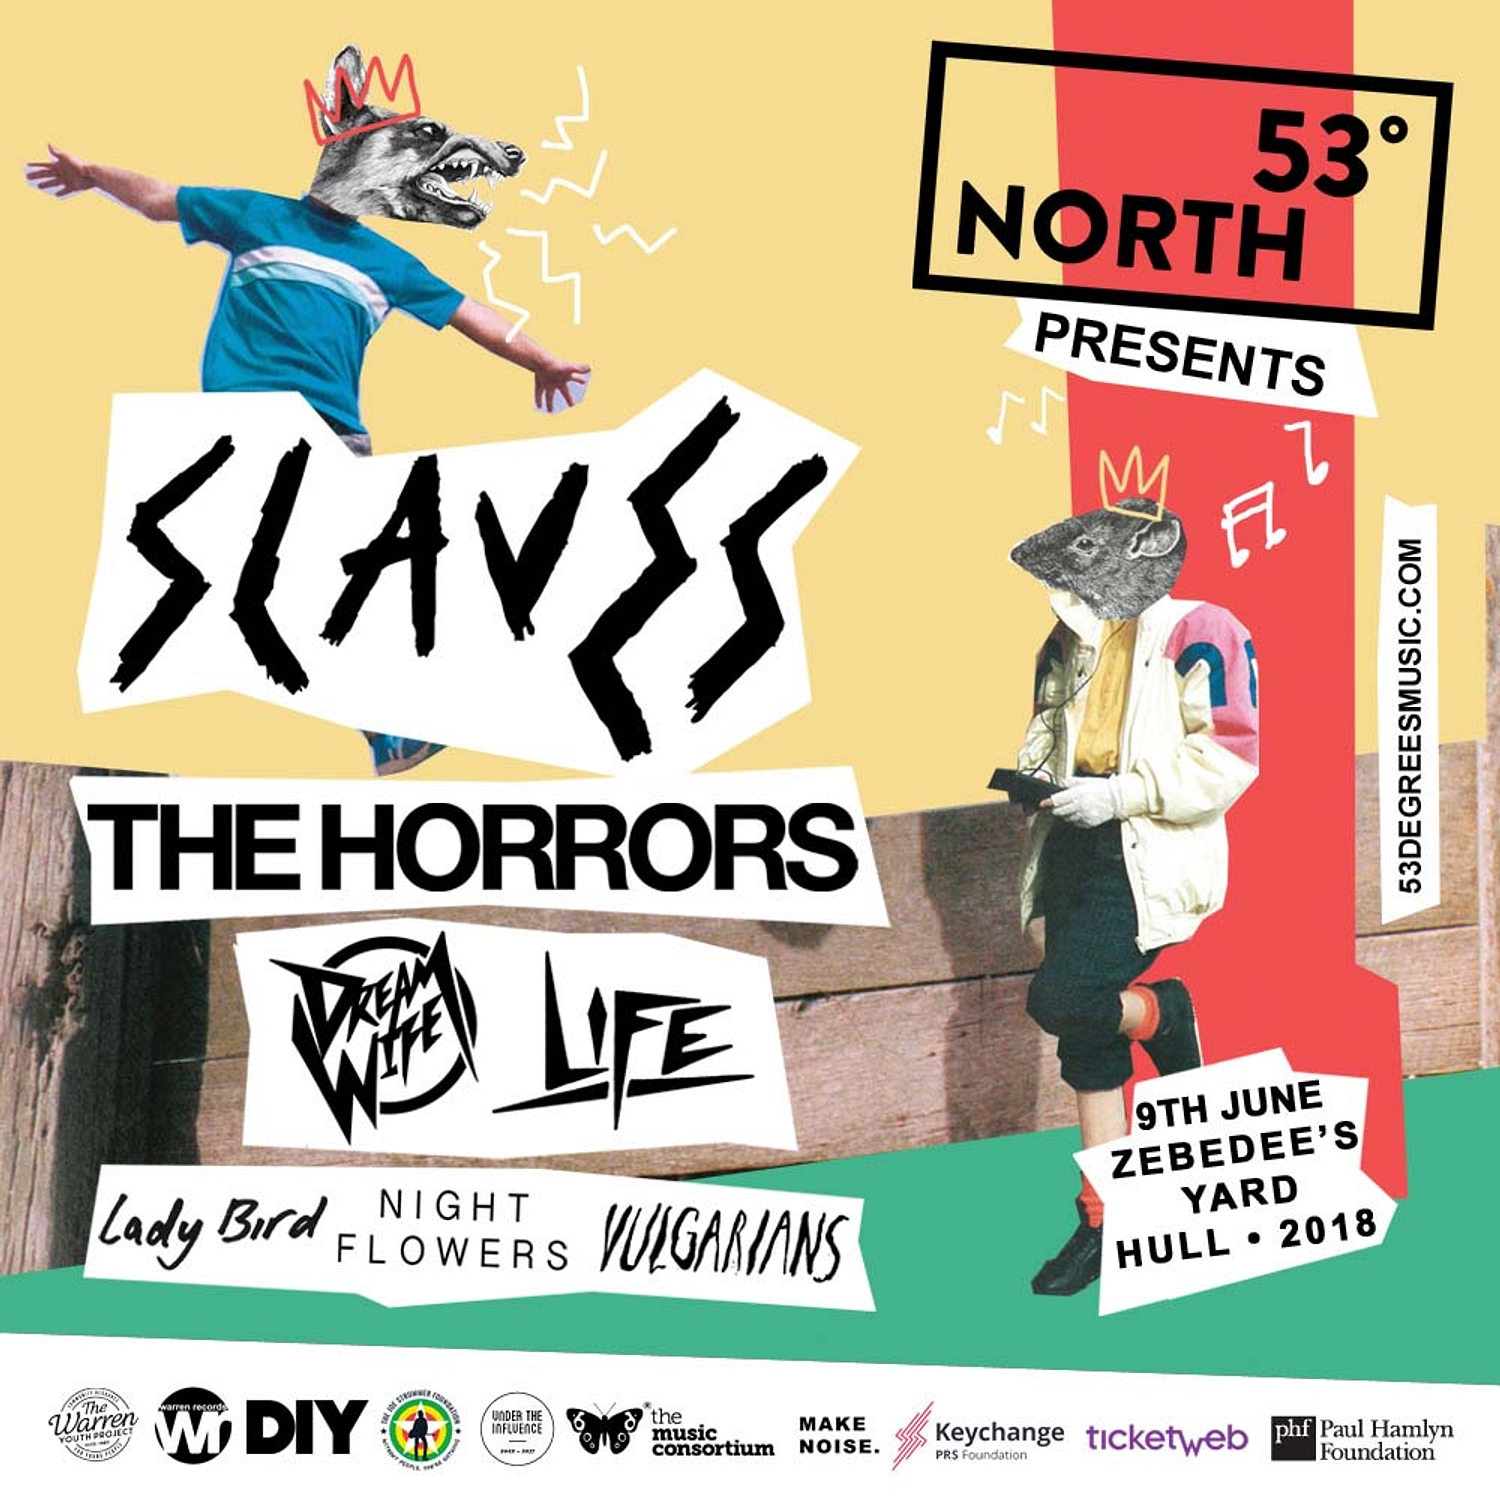 Slaves, The Horrors, Dream Wife and more are playing Hull's 53 Degrees North this June